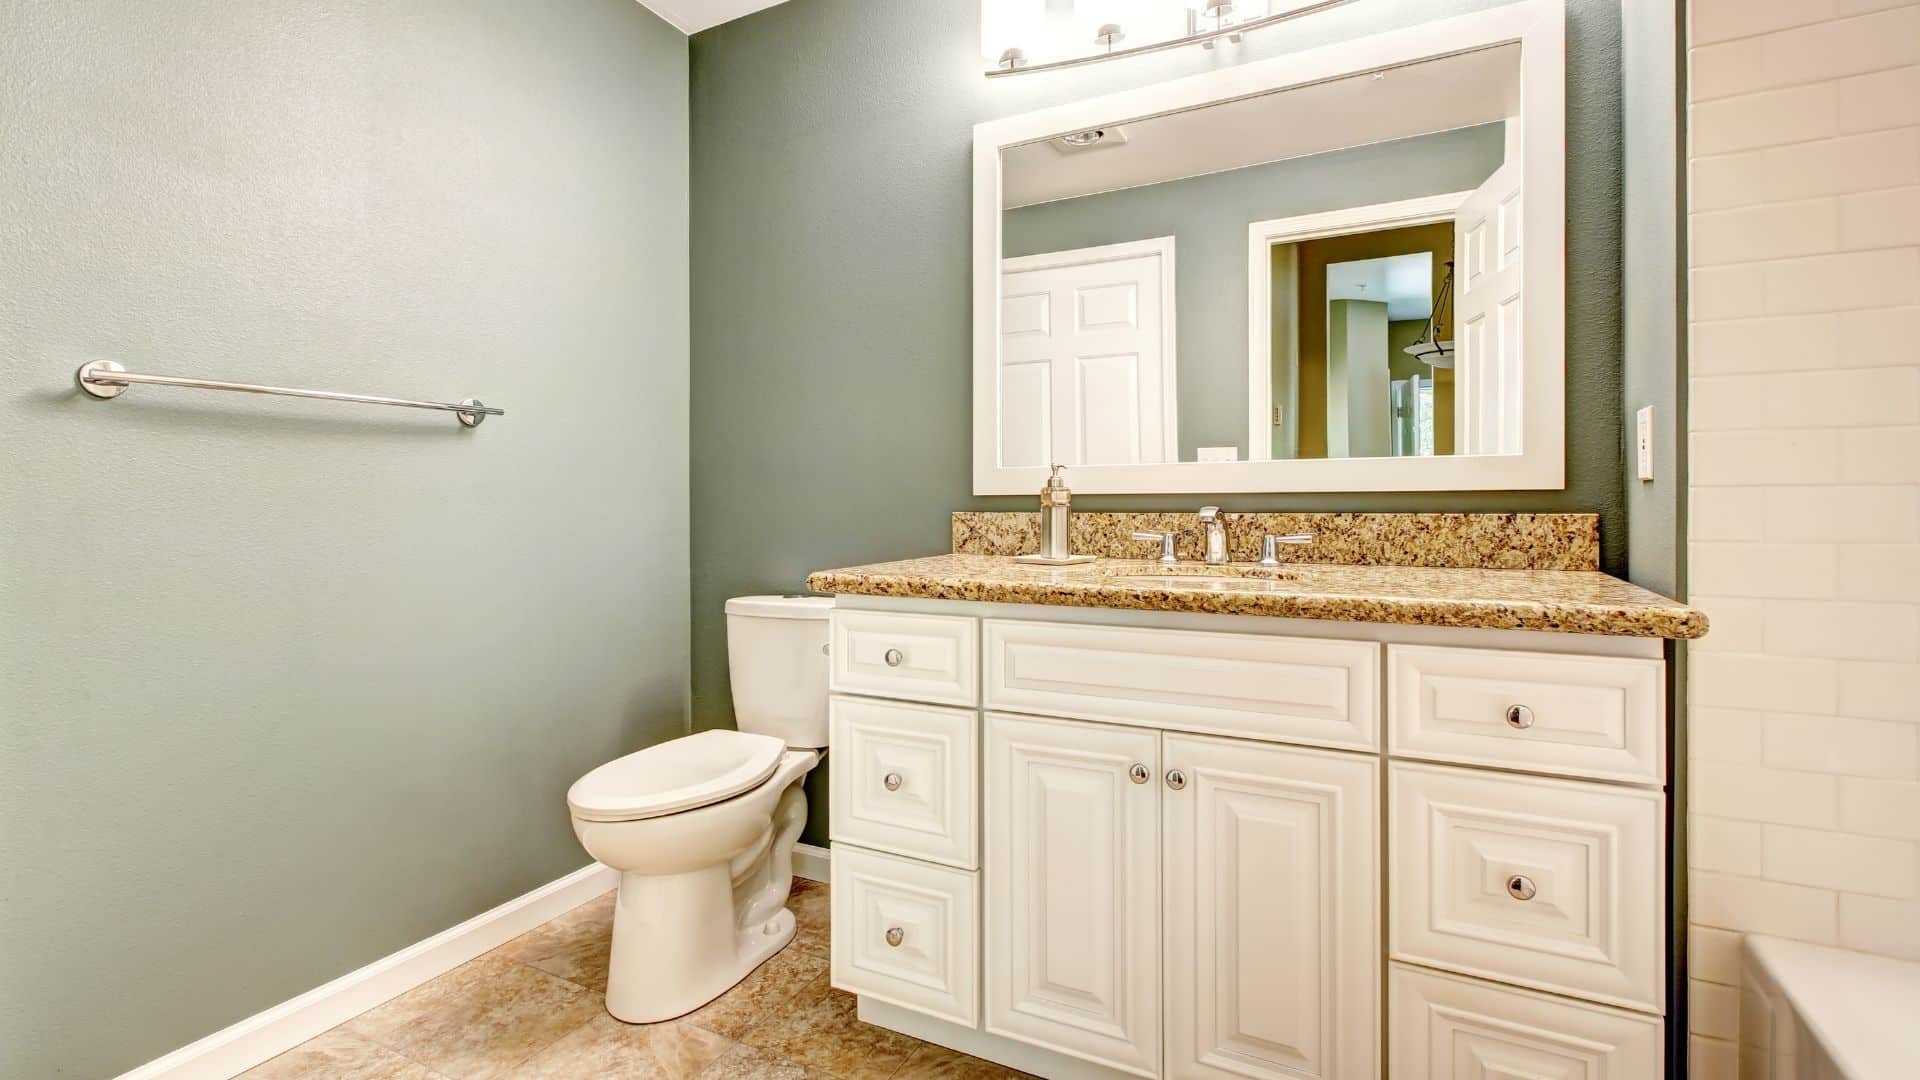 Elegant bathroom with white cabinets, granite countertop, and toilet